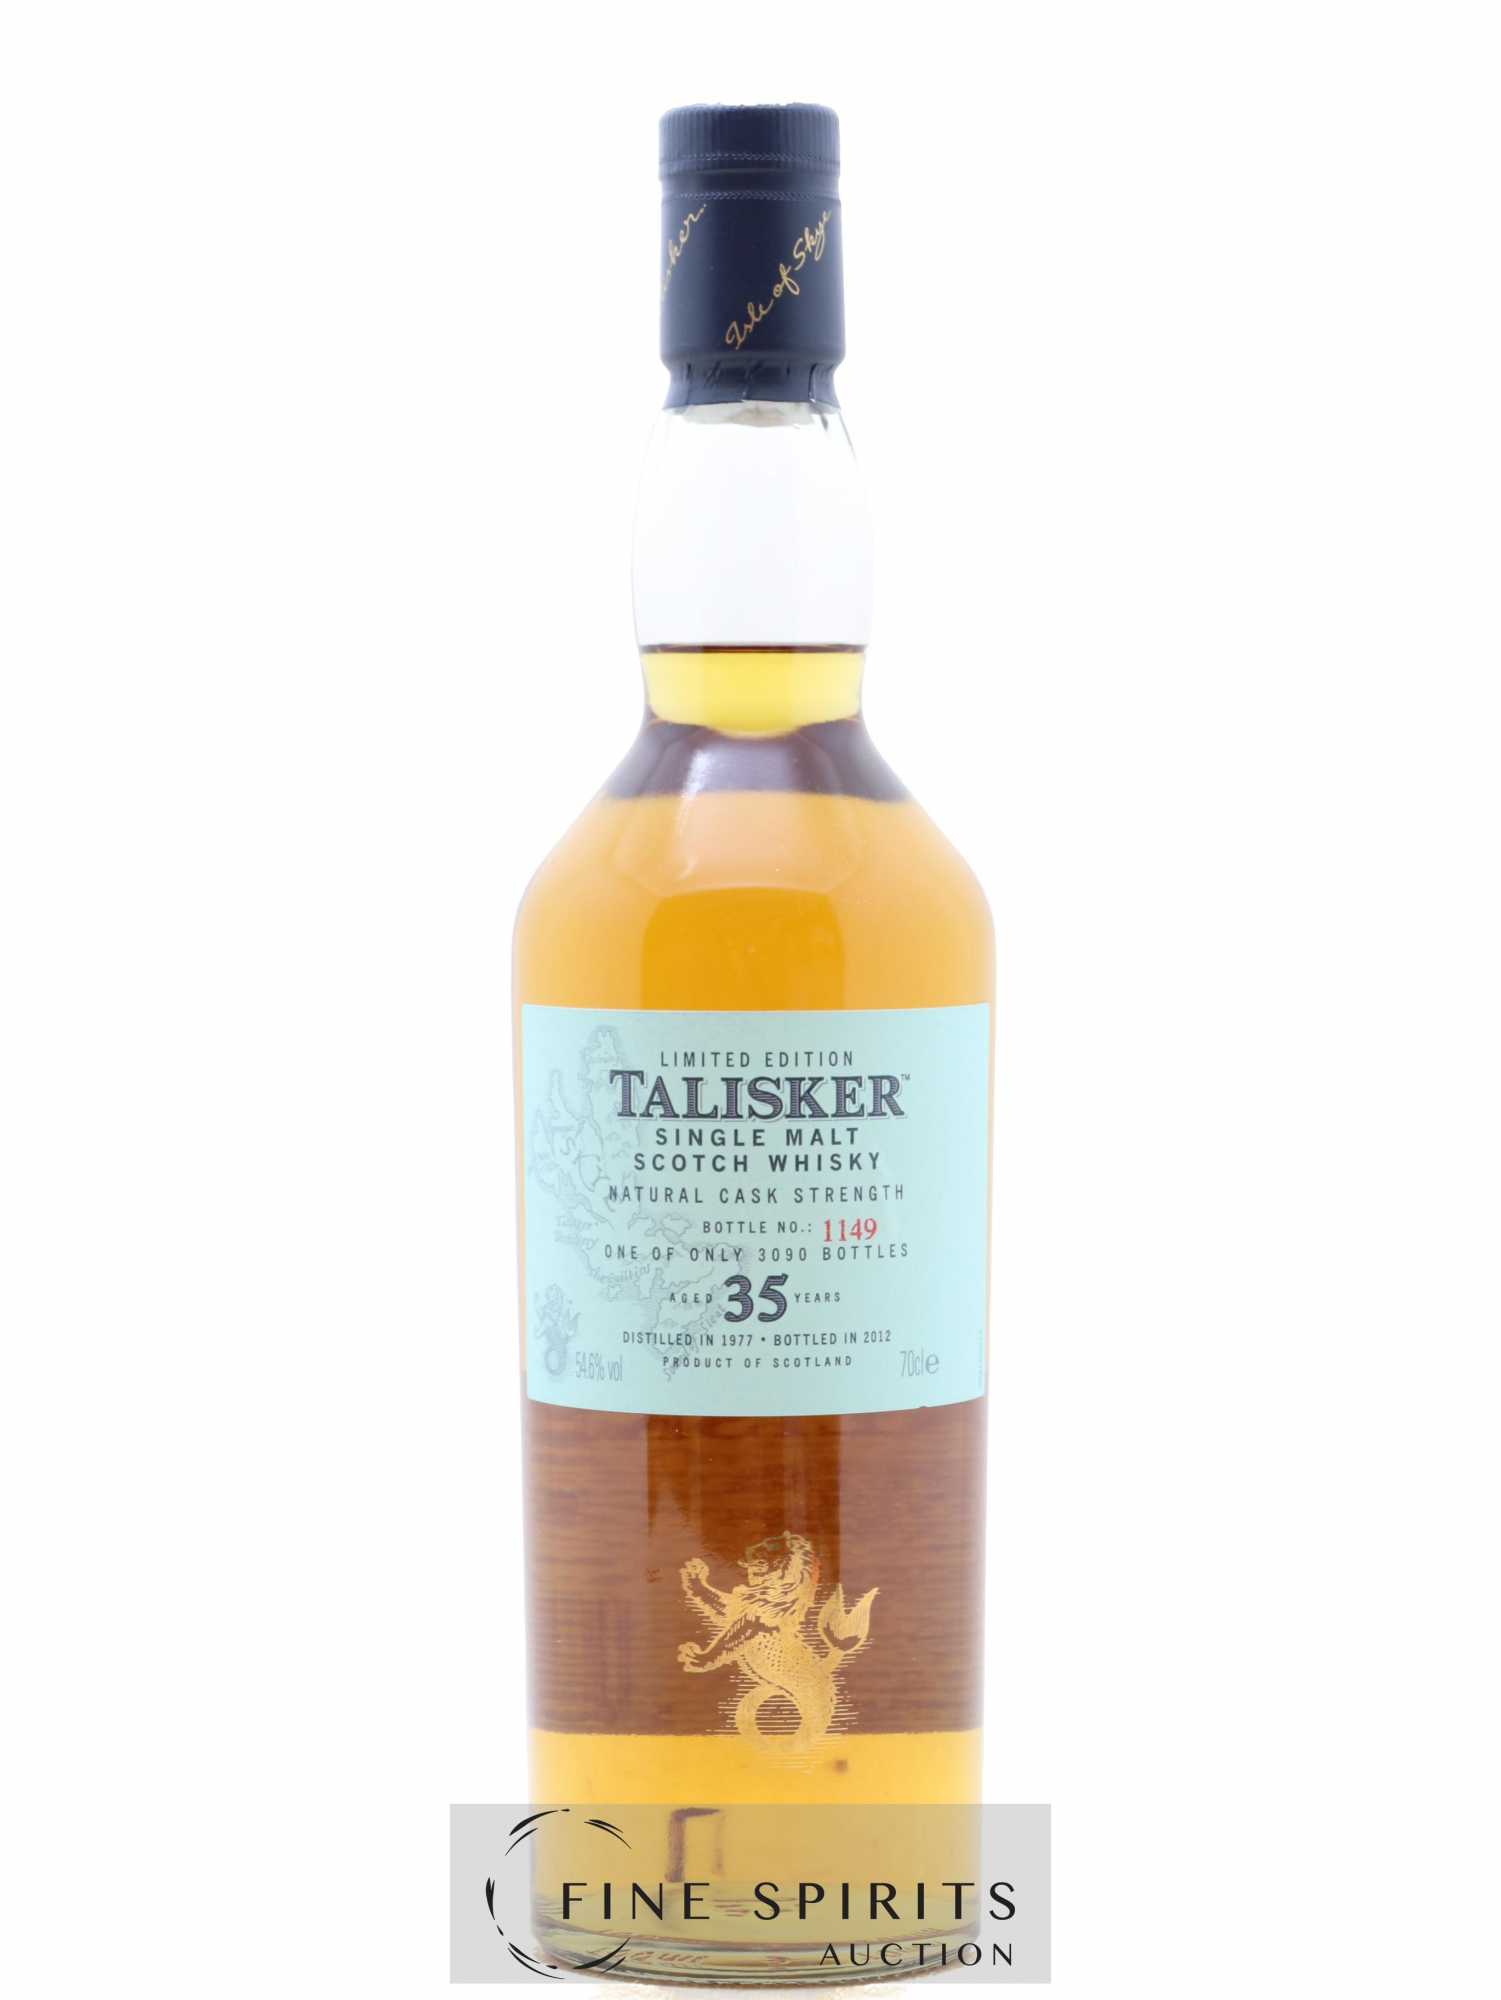 Talisker 35 years 1977 Of. 16th Edition 2012 Release Classic Malts 